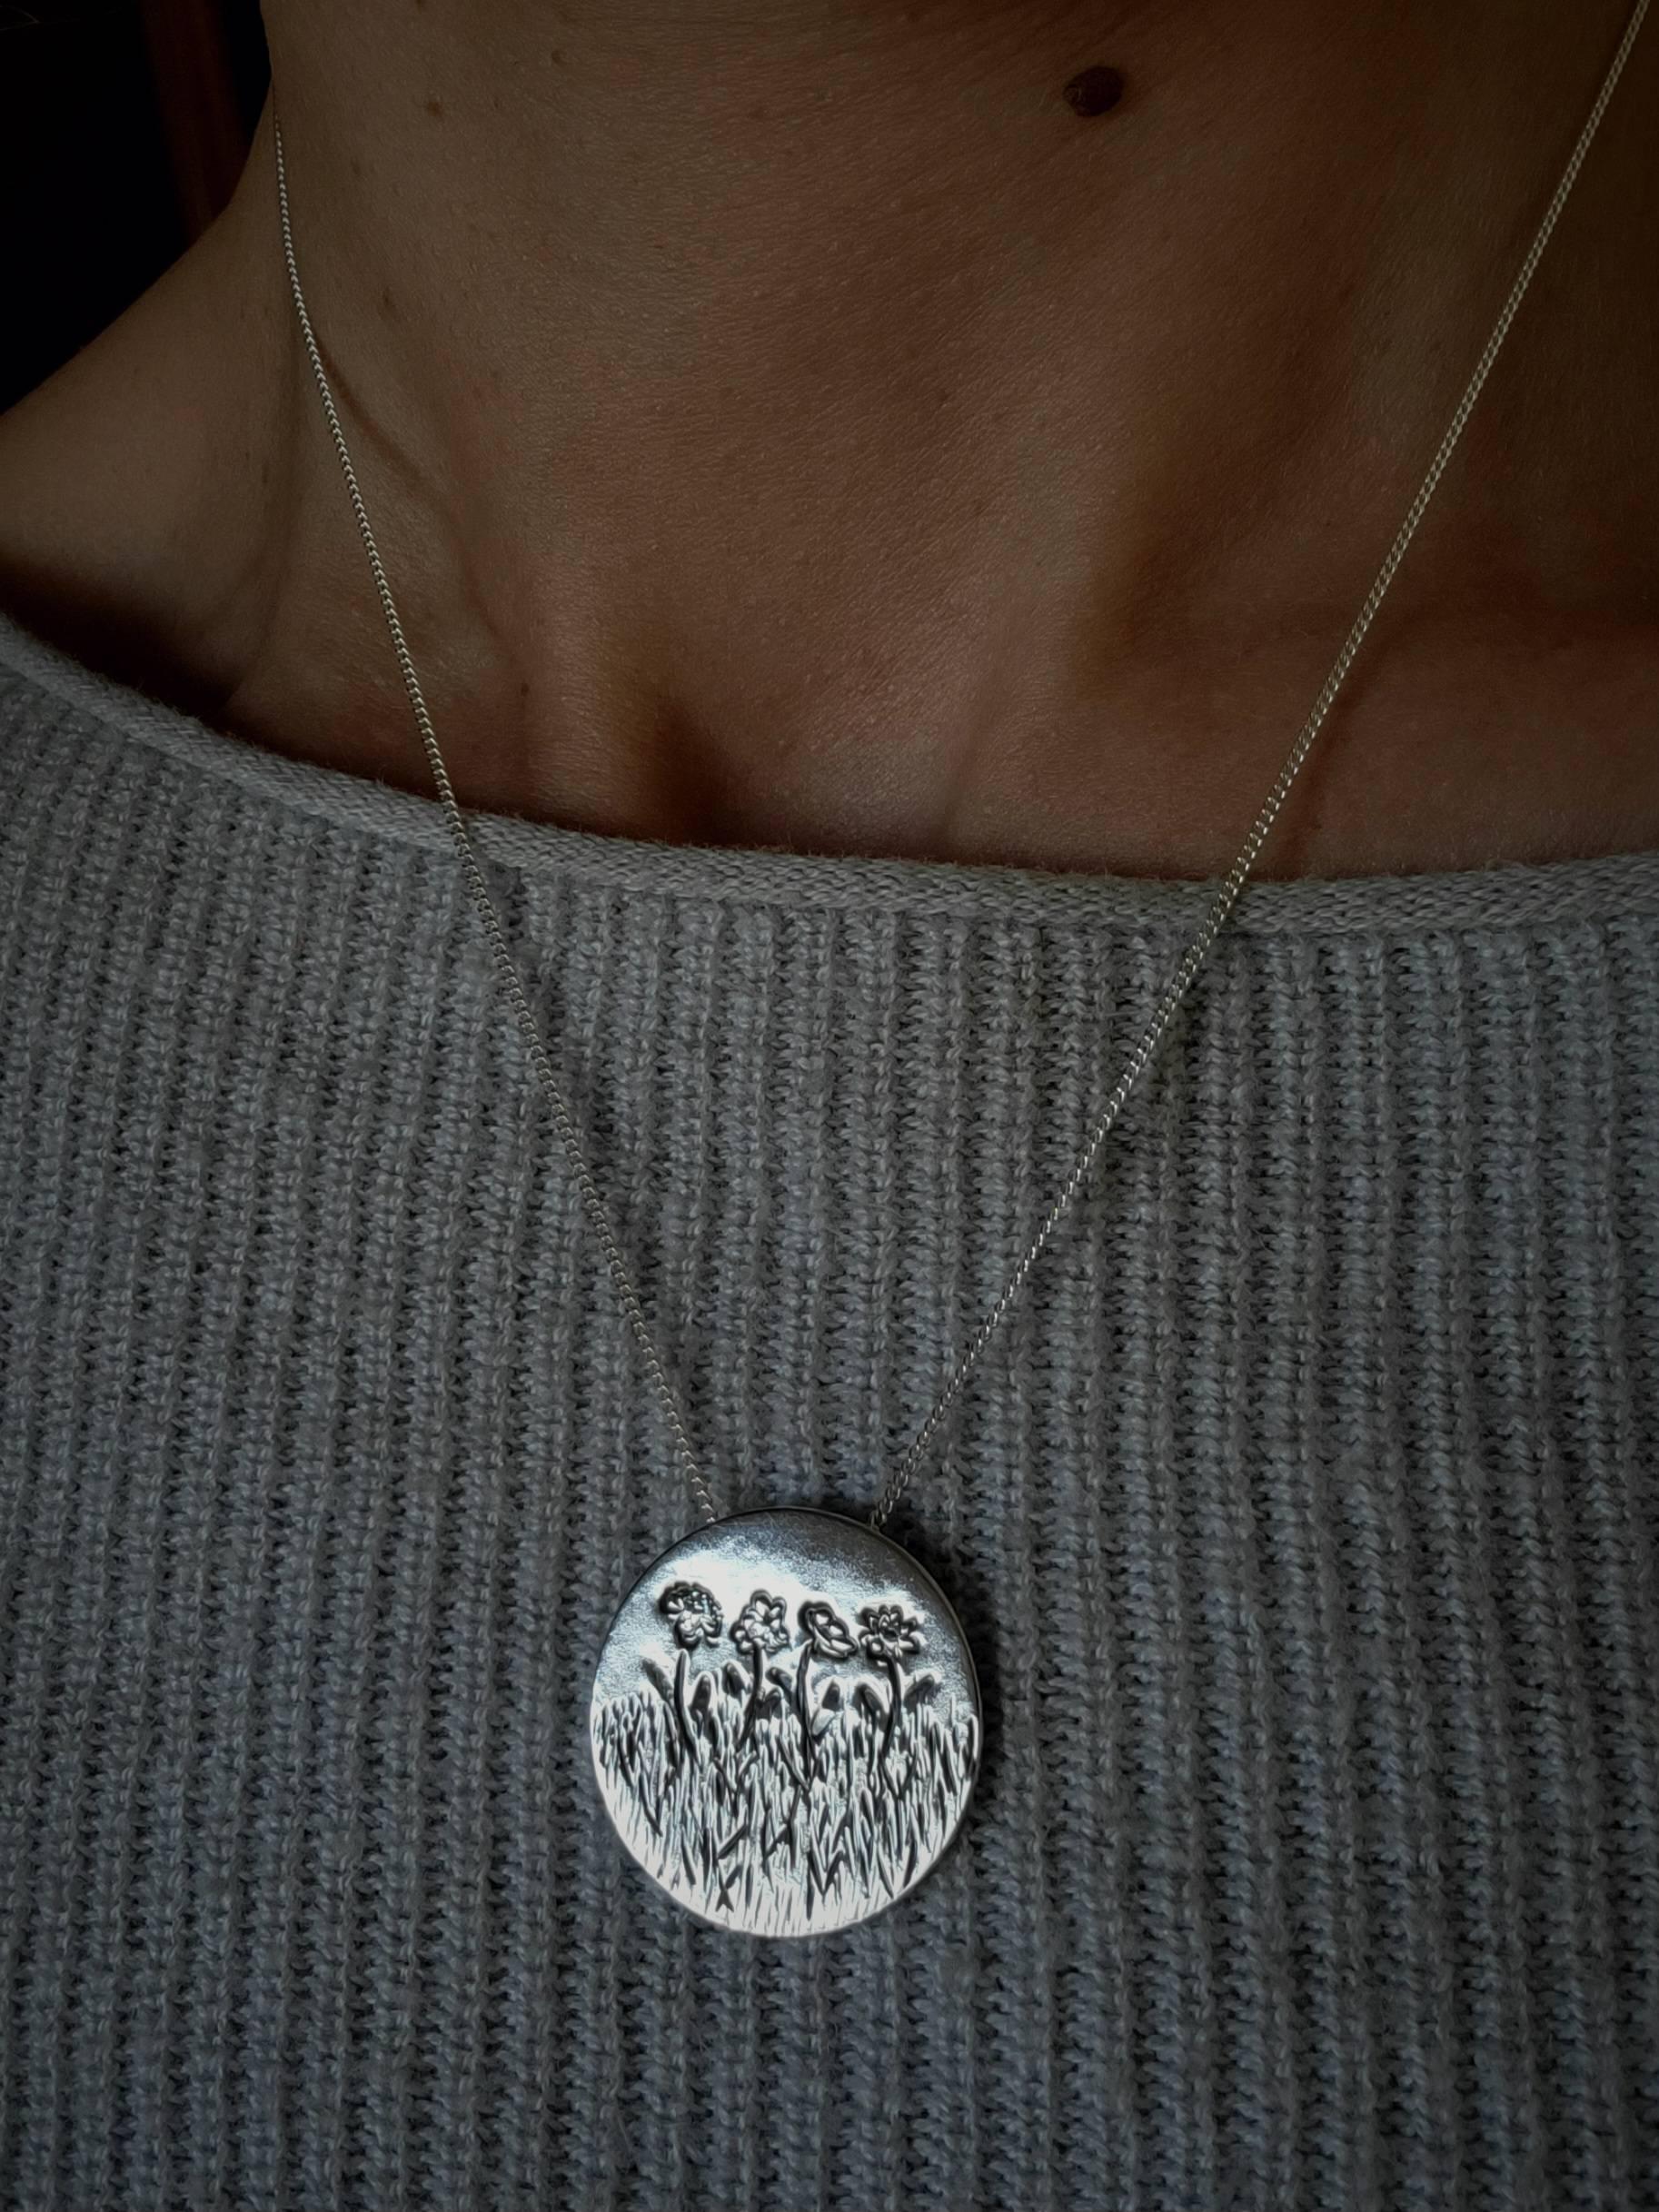 Our birth flower necklaces are a unique personalized necklace for mom, modeled here on a woman's neck.